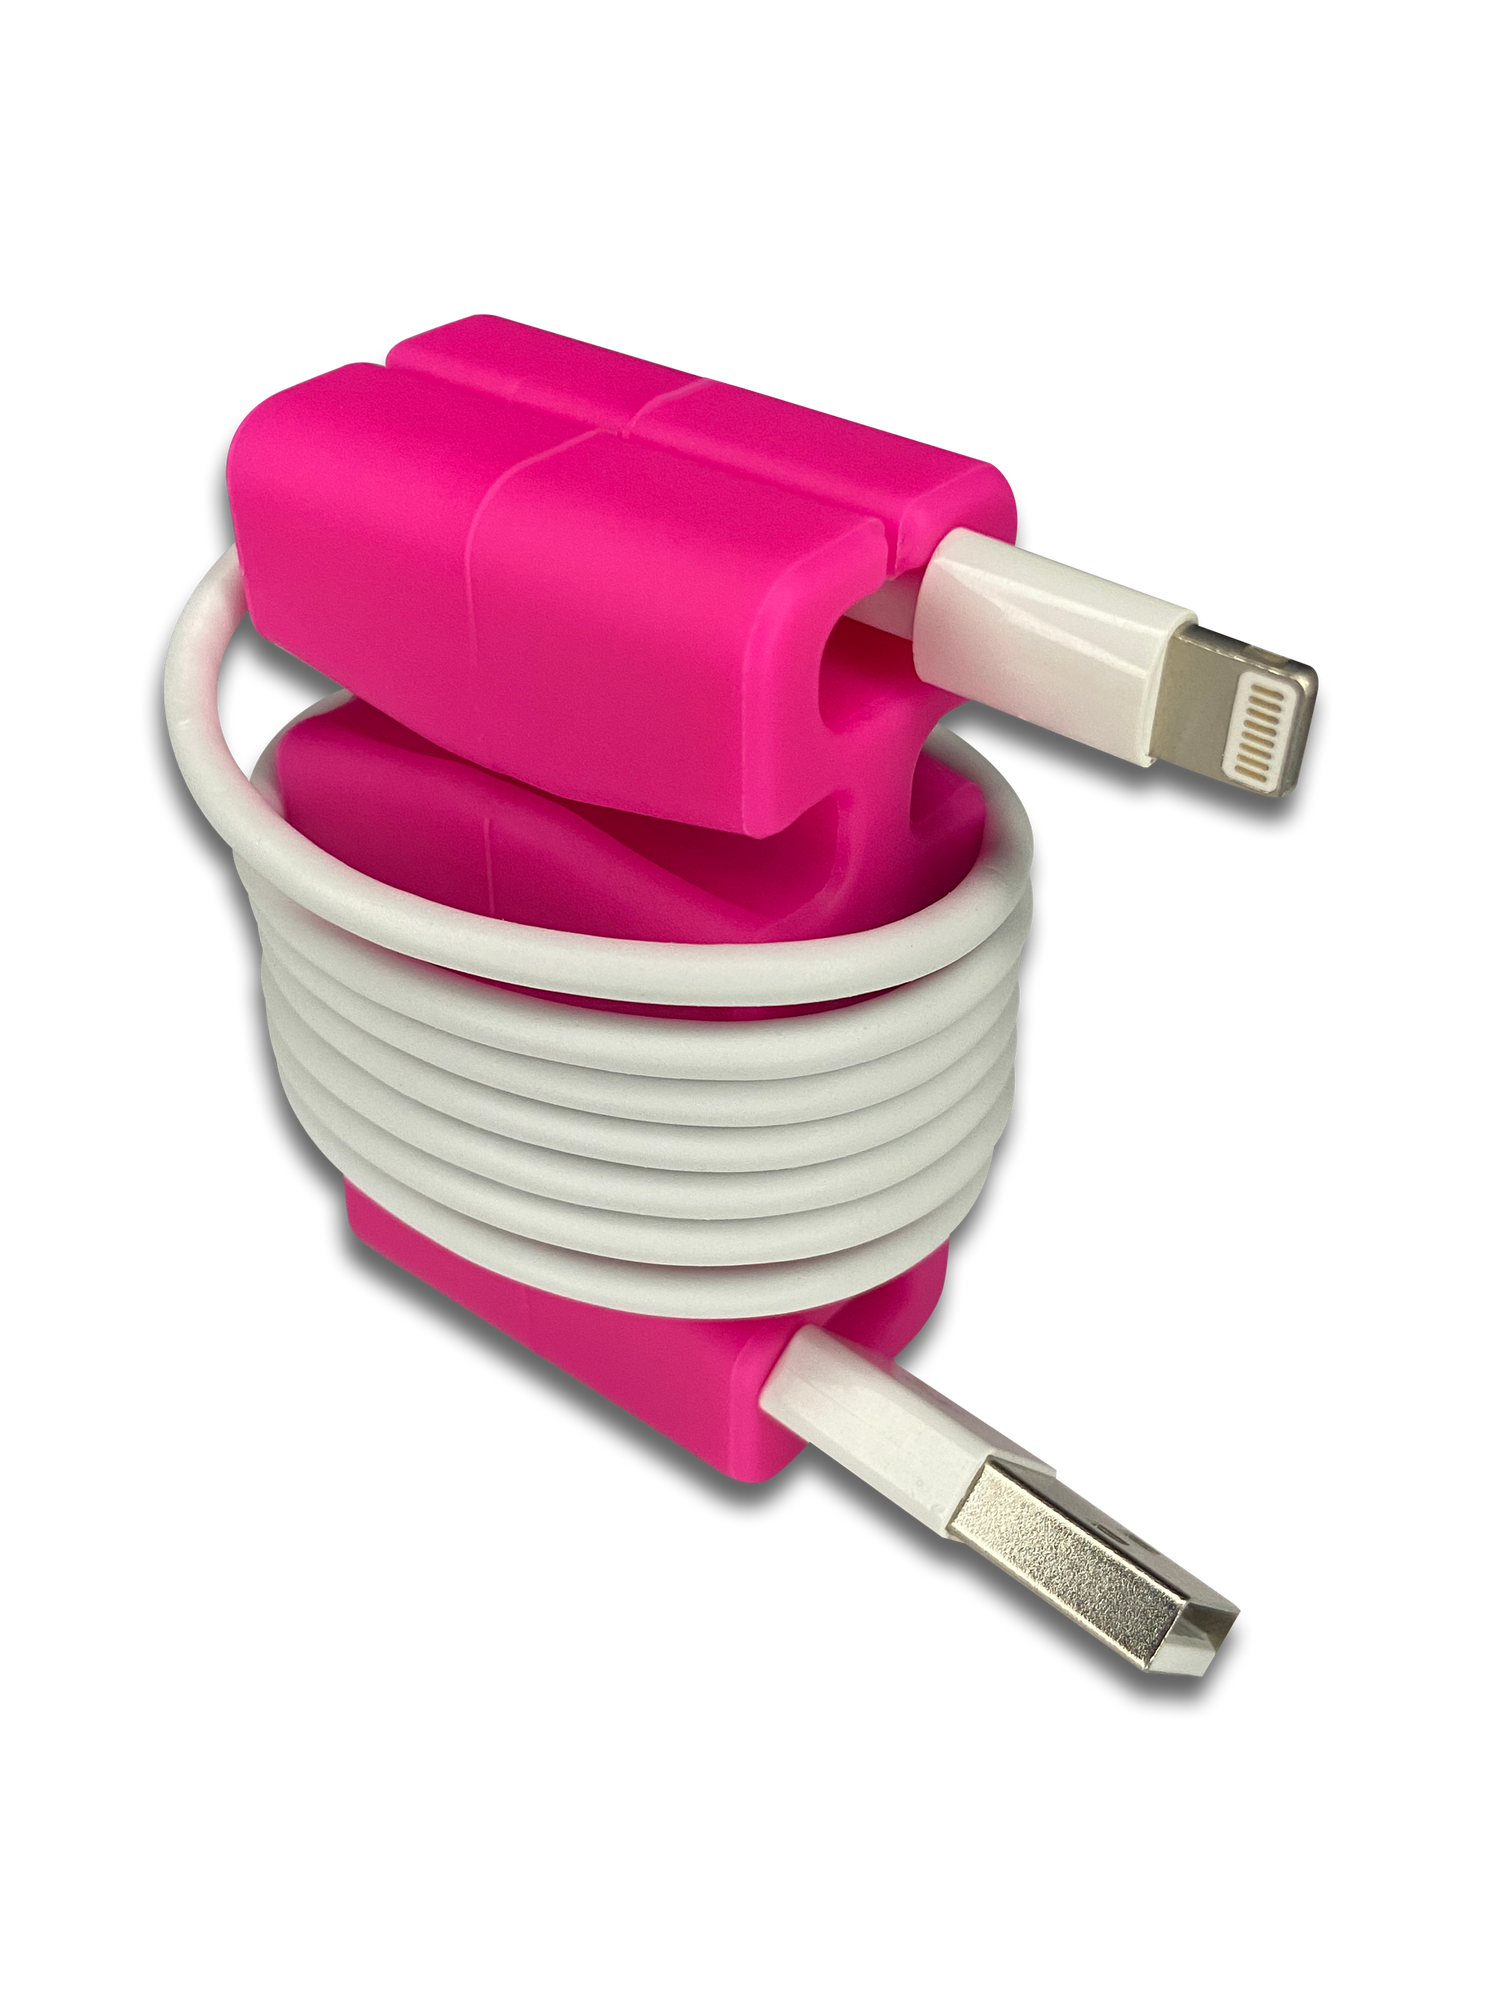 Pink CordBrick securely wrapping one Apple iPhone cord around it for travel or storage.